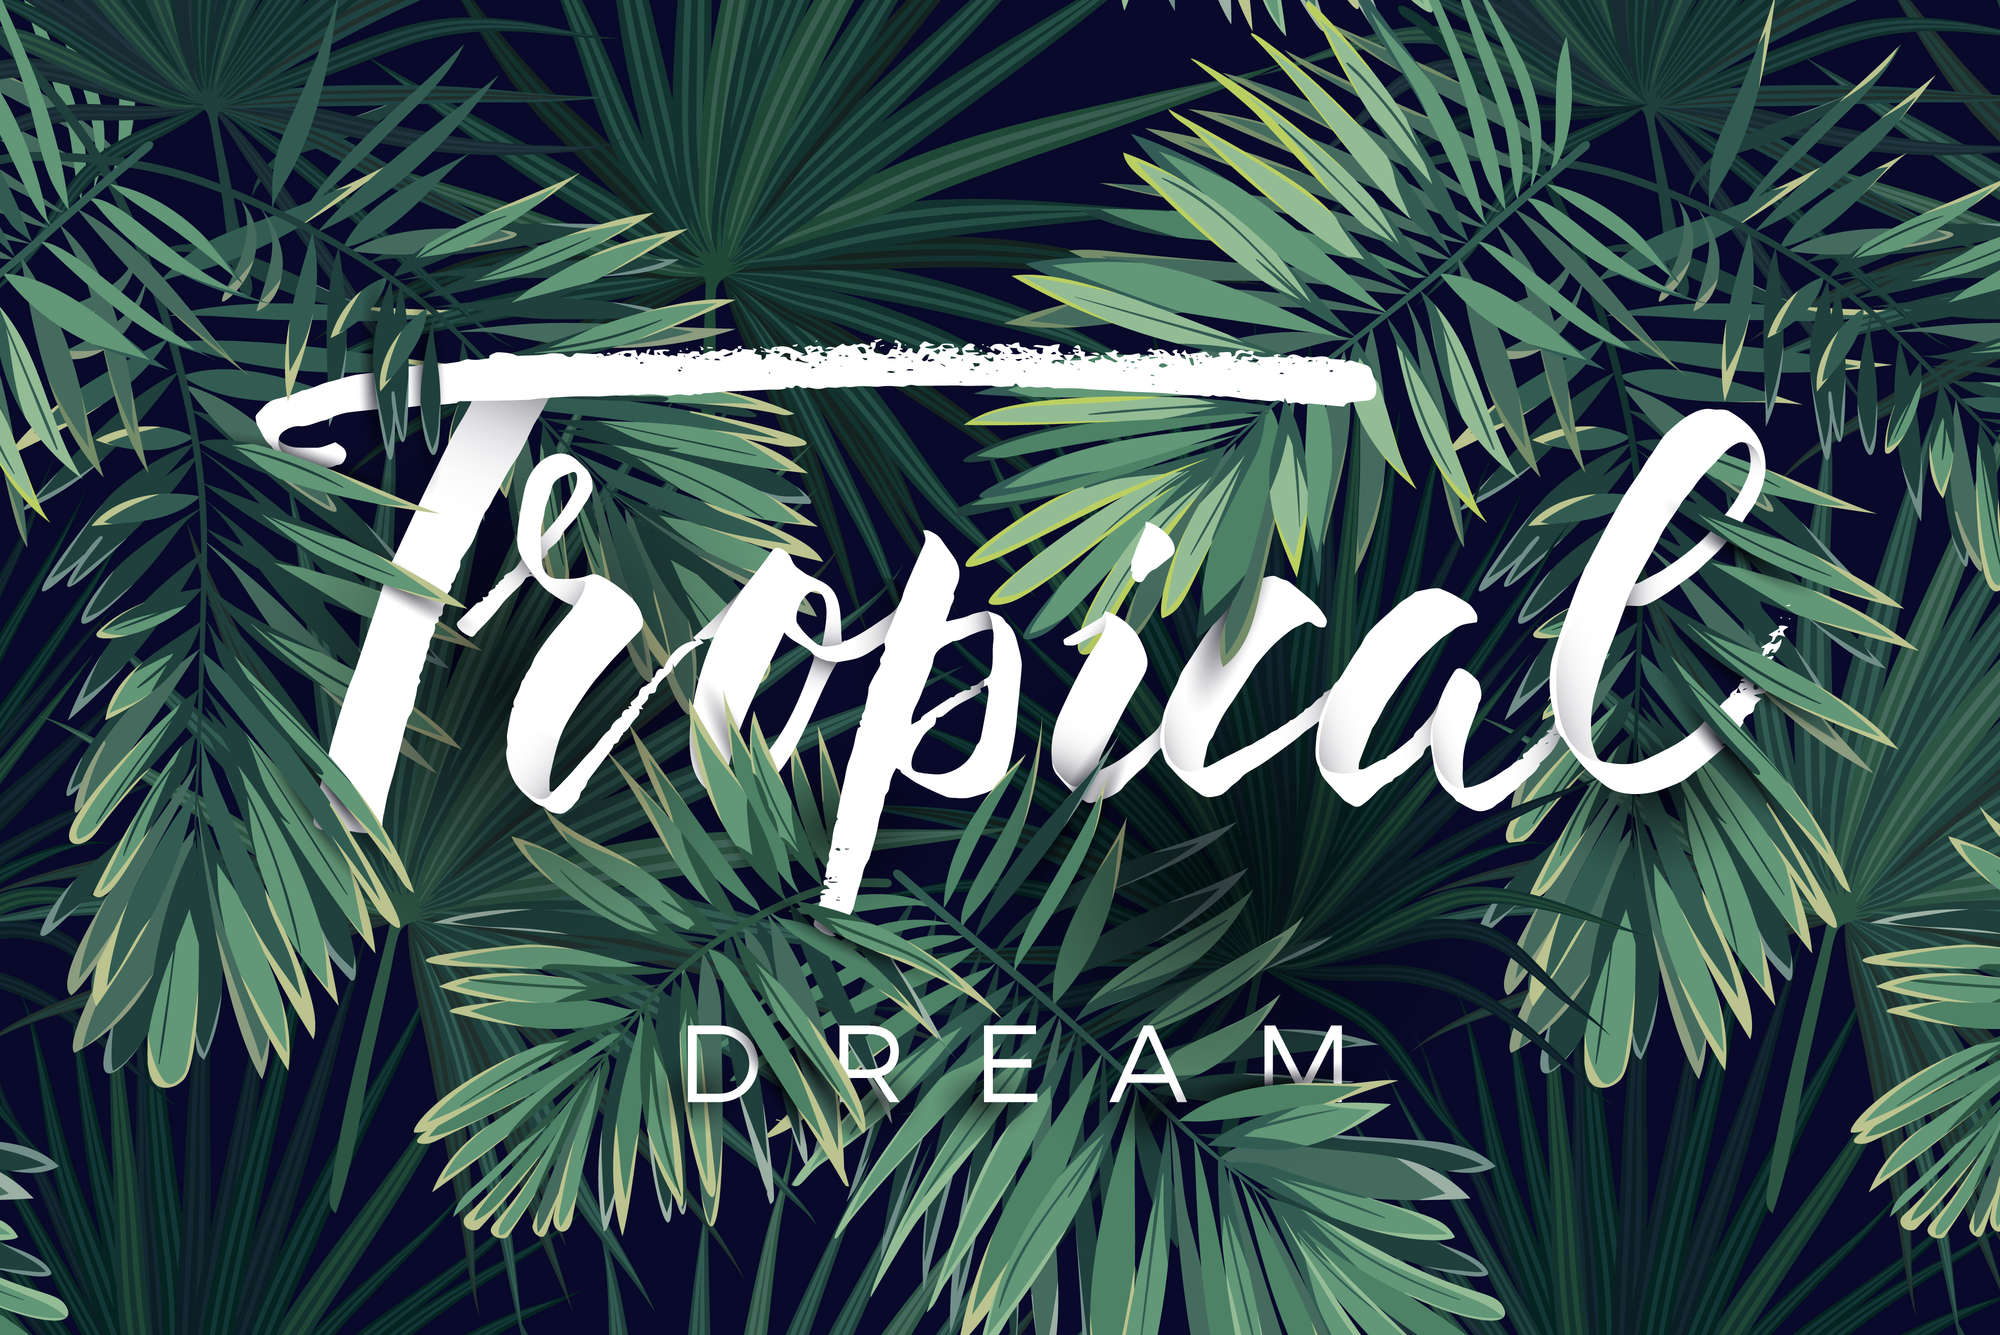             Graphic wall mural "Tropical Dream" lettering on textured non-woven
        